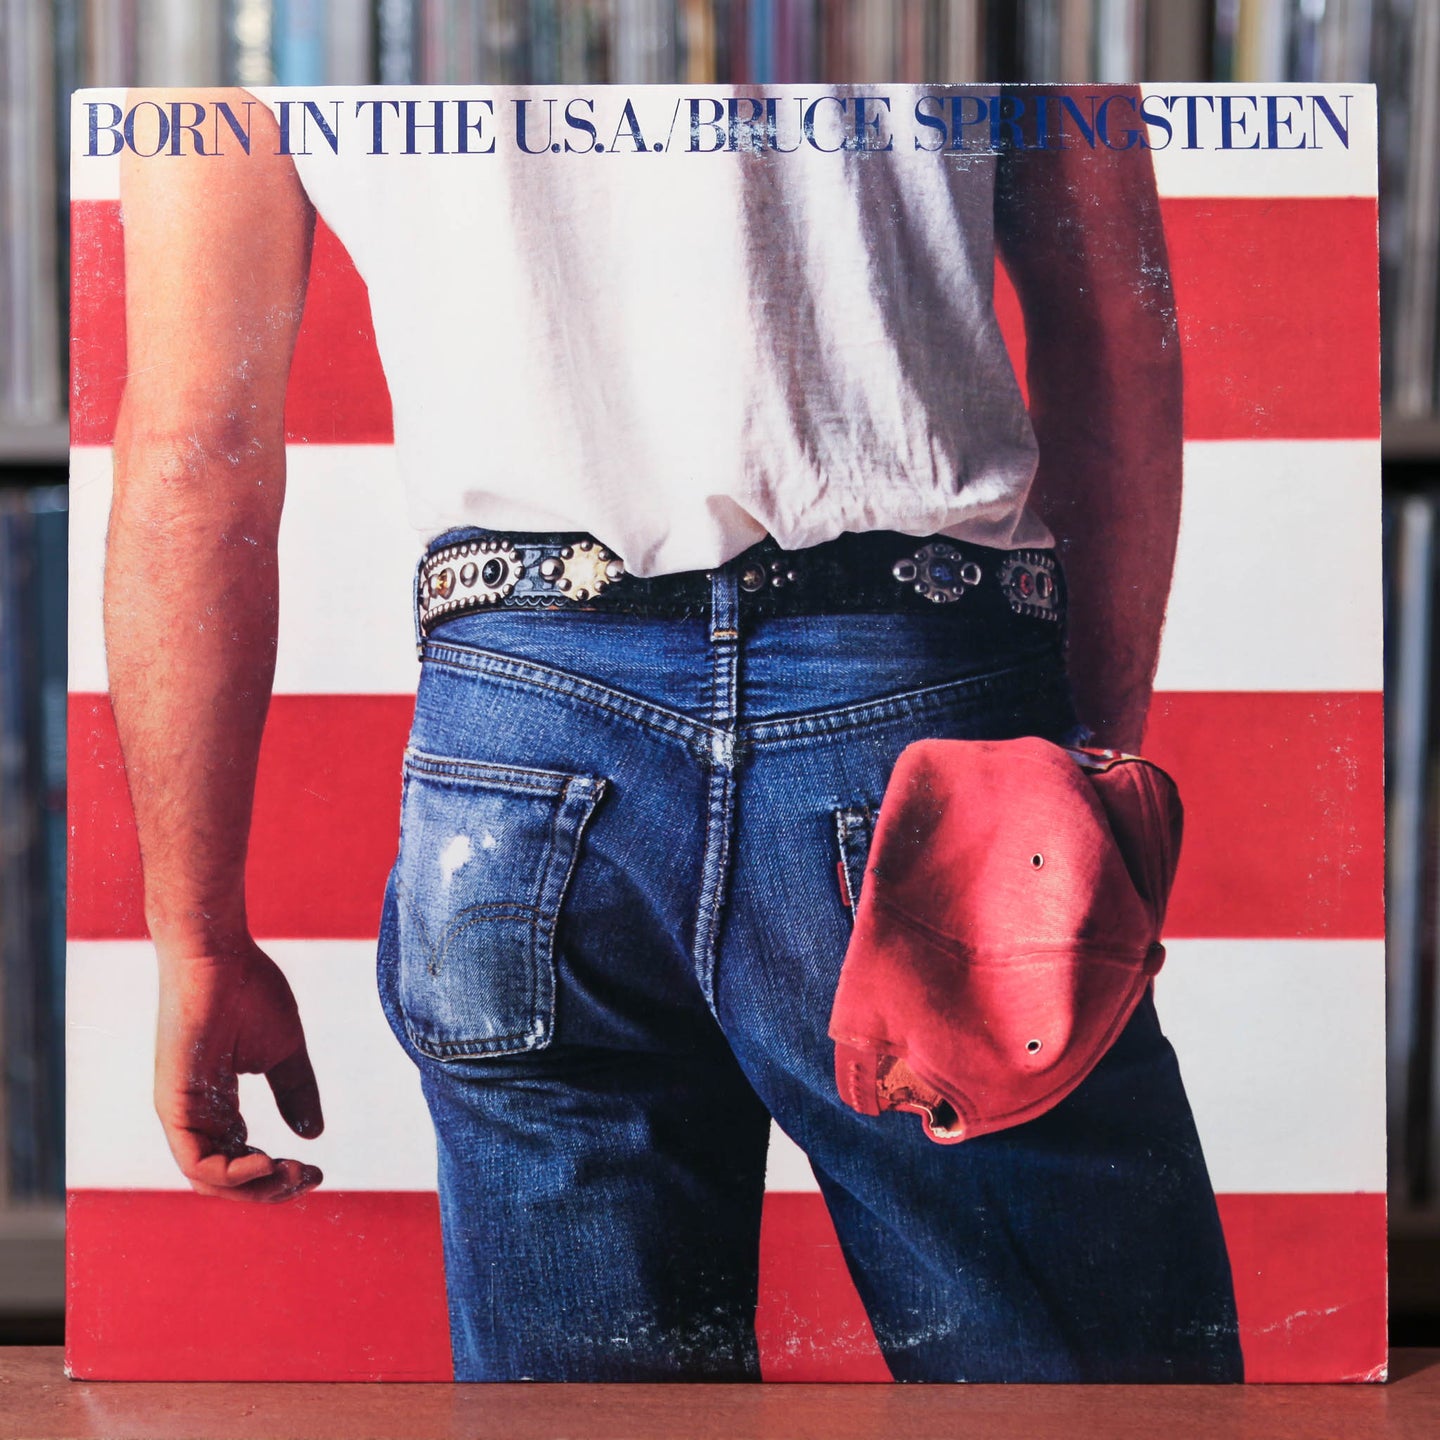 Bruce Springsteen - Born In The U.S.A. - 1984  Columbia, VG+/EX